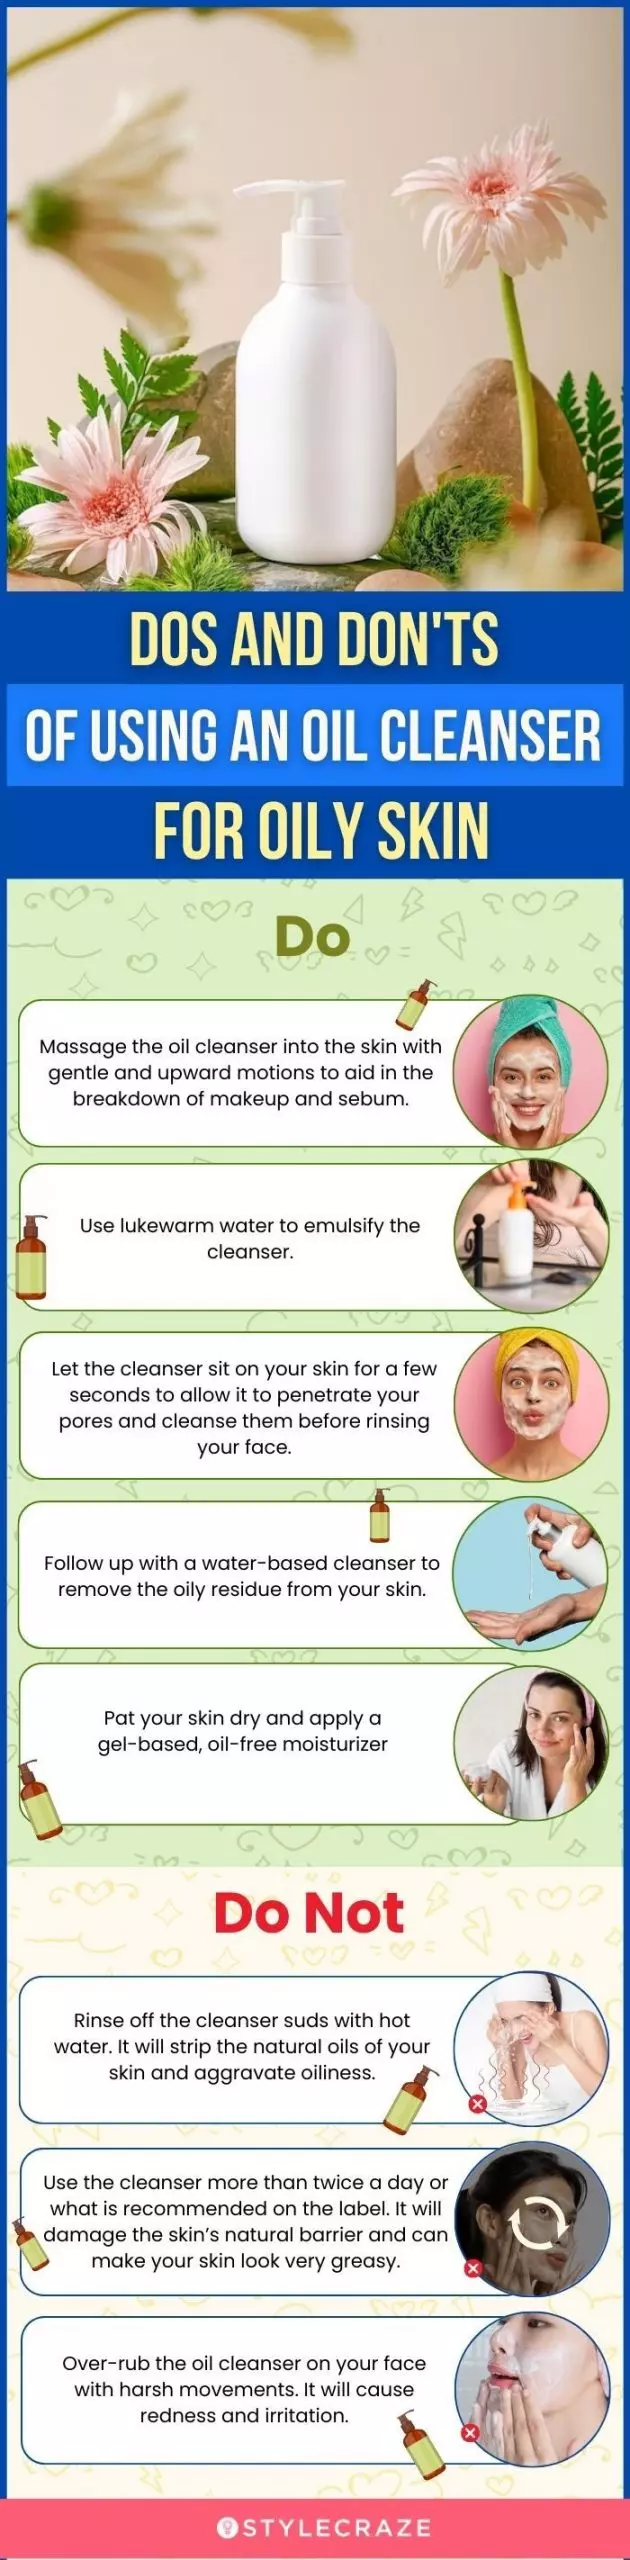 Dos And Don'ts Of Using An Oil Cleanser For Oily Skin (infographic)